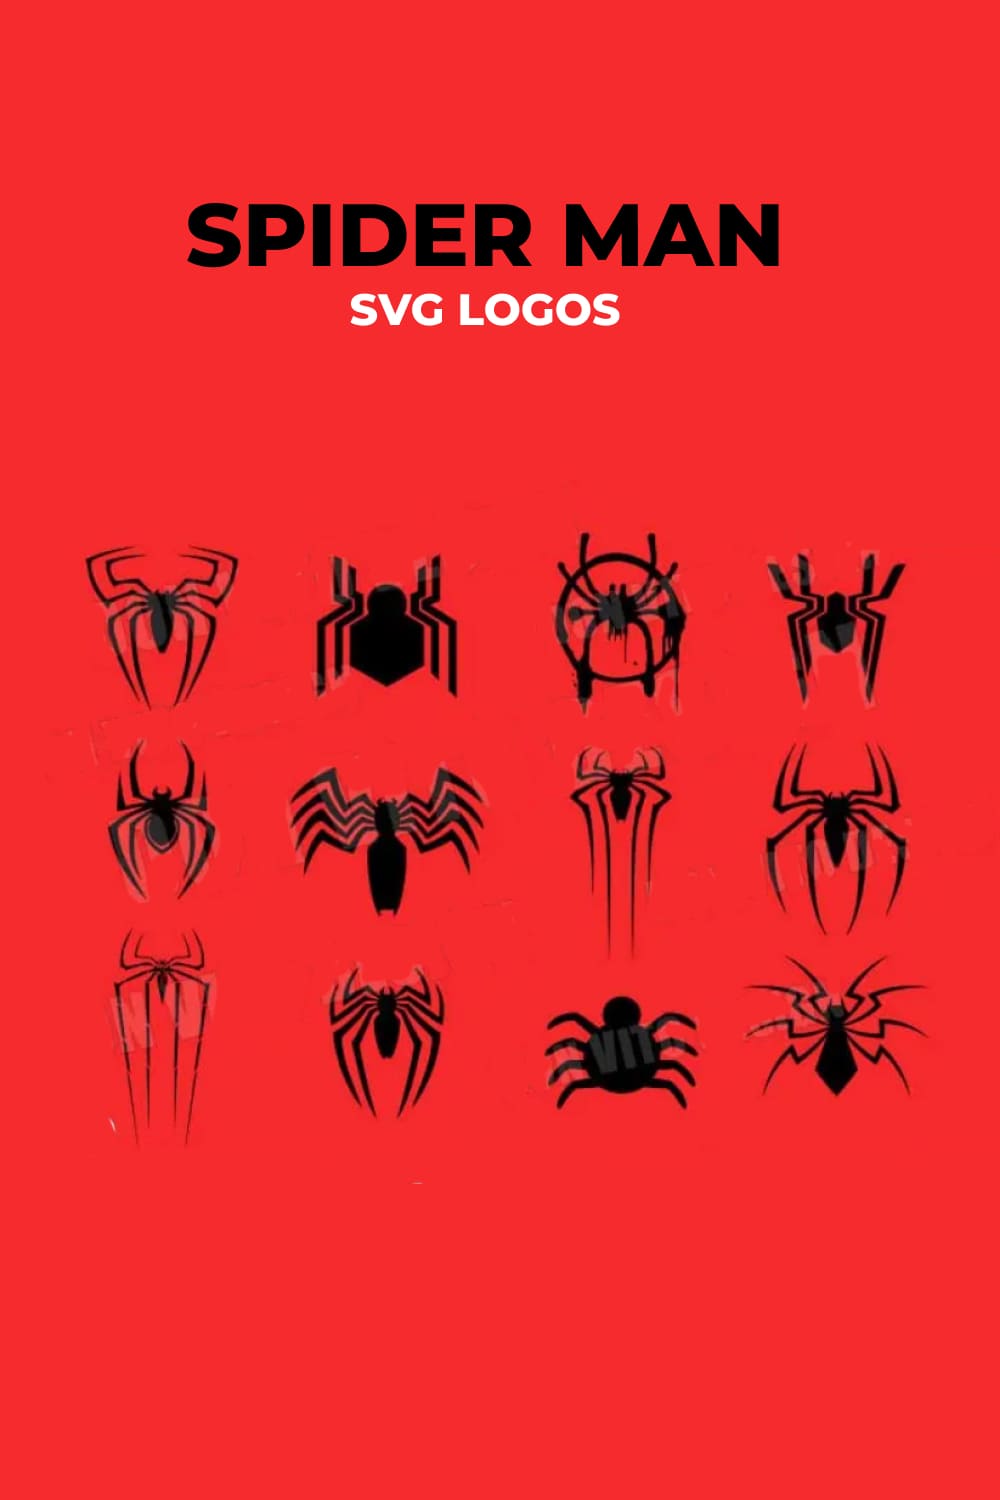 Collage with Spiderman SVG Logos.